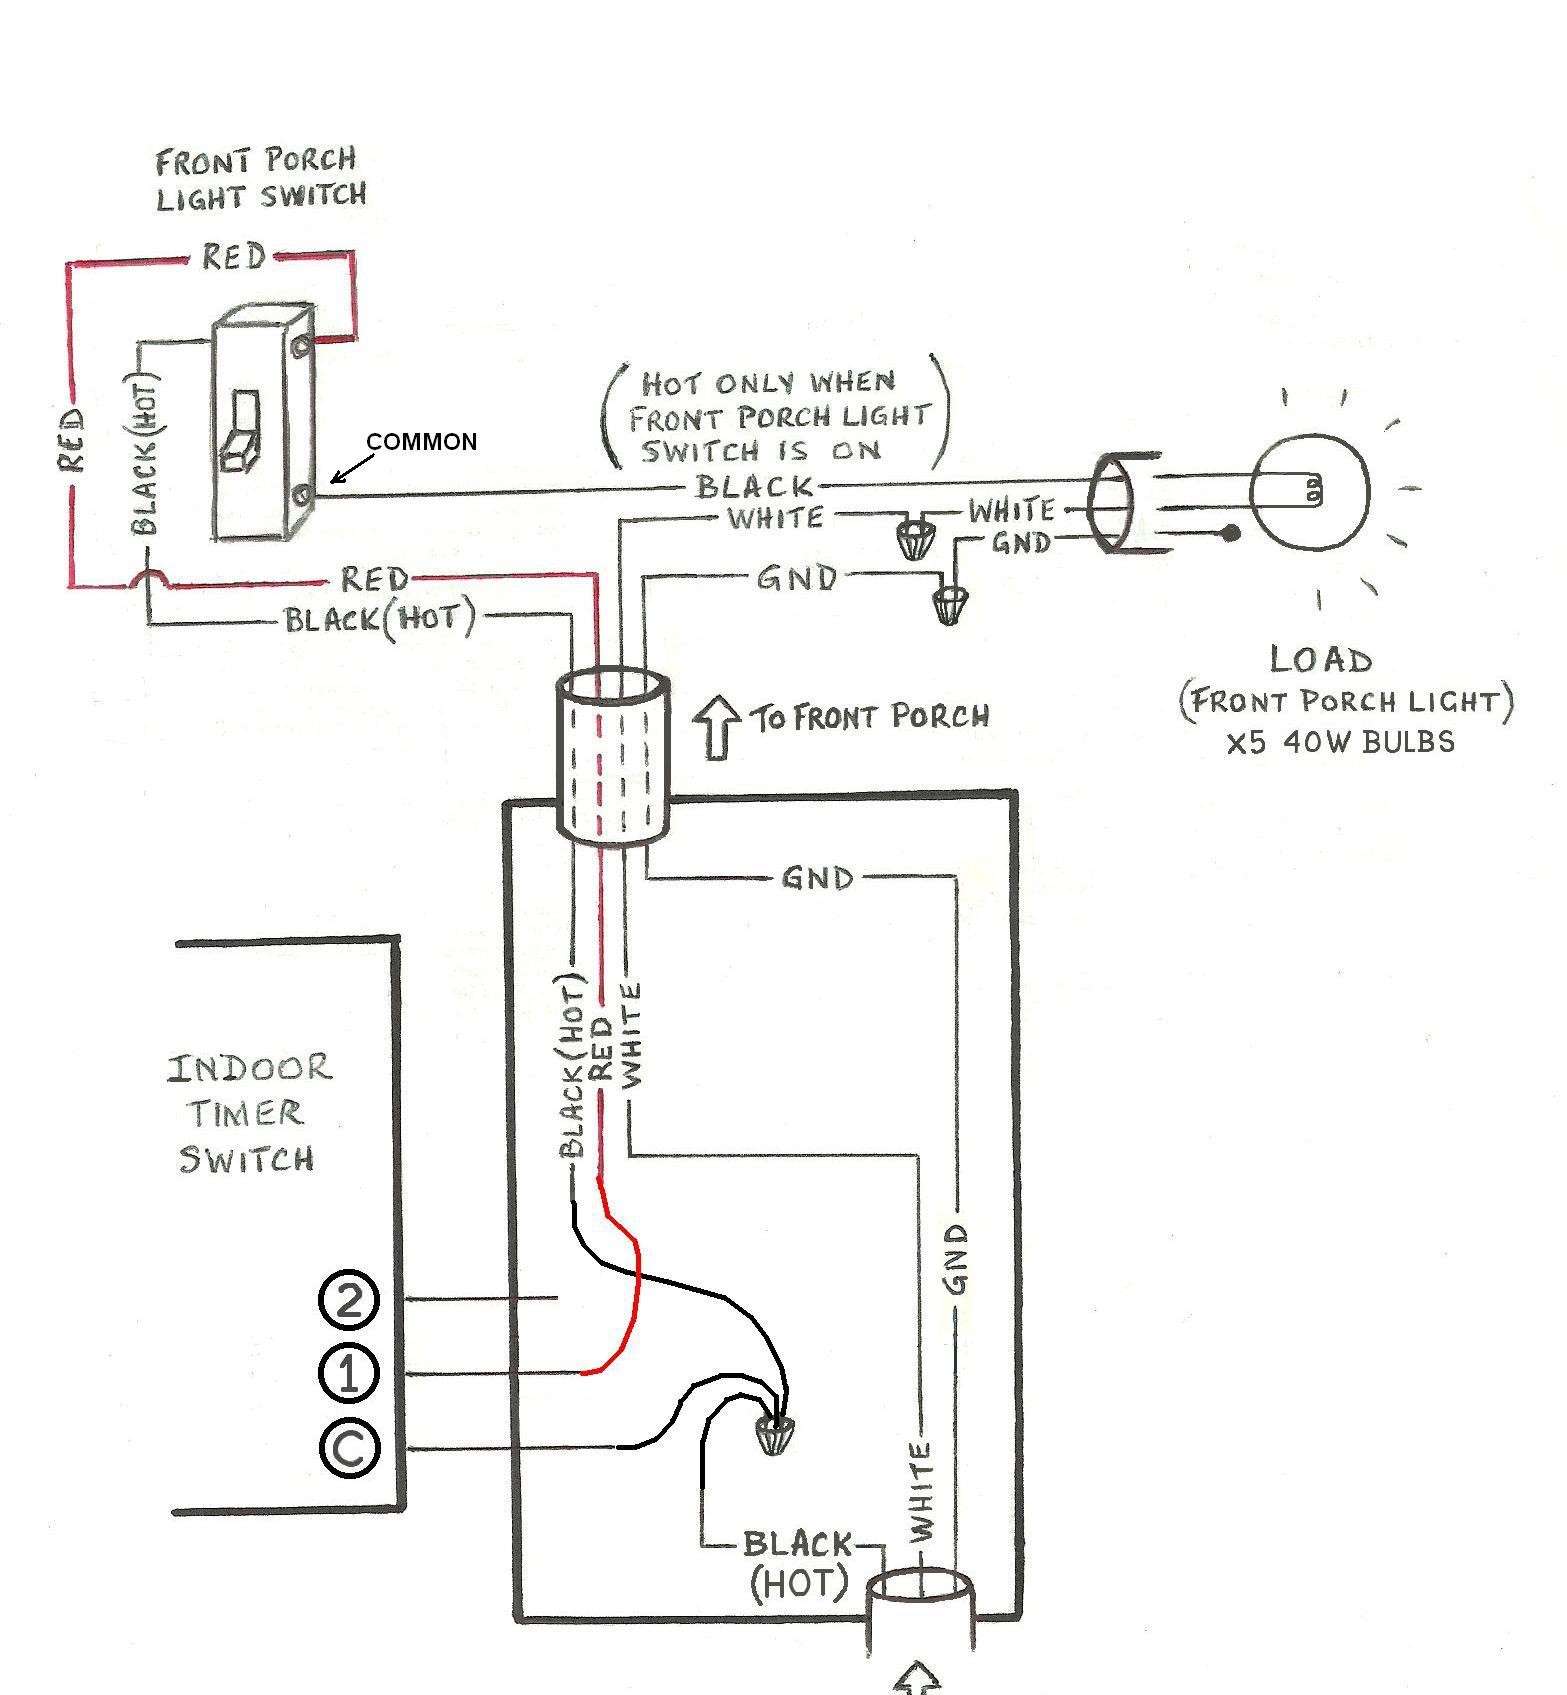 Dual Light Switch Wiring New Light Switch Home Wiring Diagram Dual Wiring Diagrams Schematics